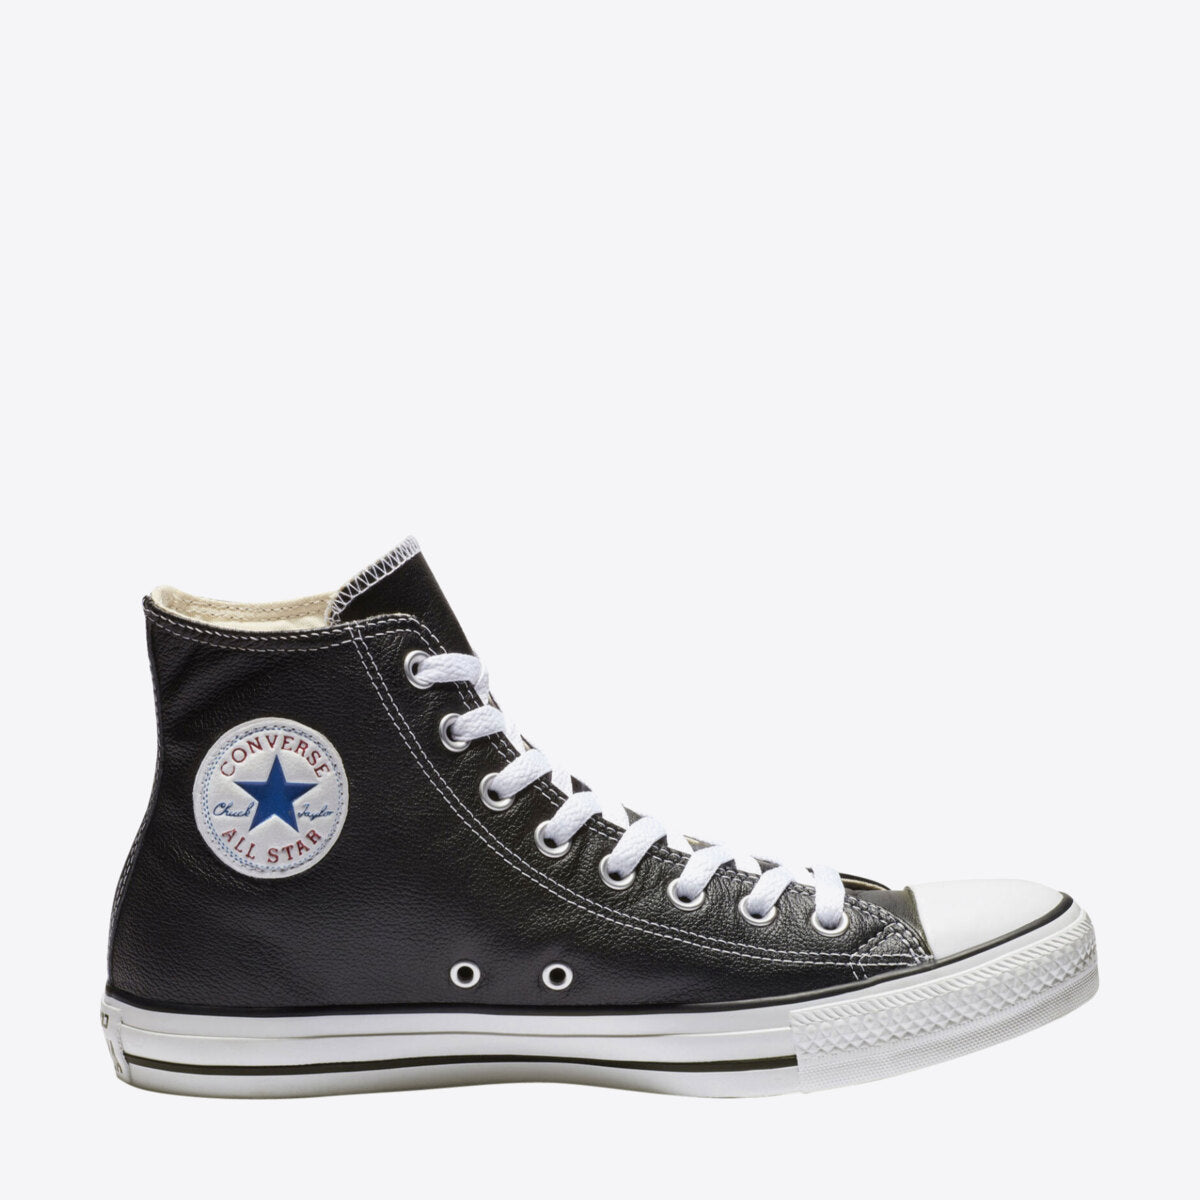  Chuck Taylor All Star Leather High Top Black